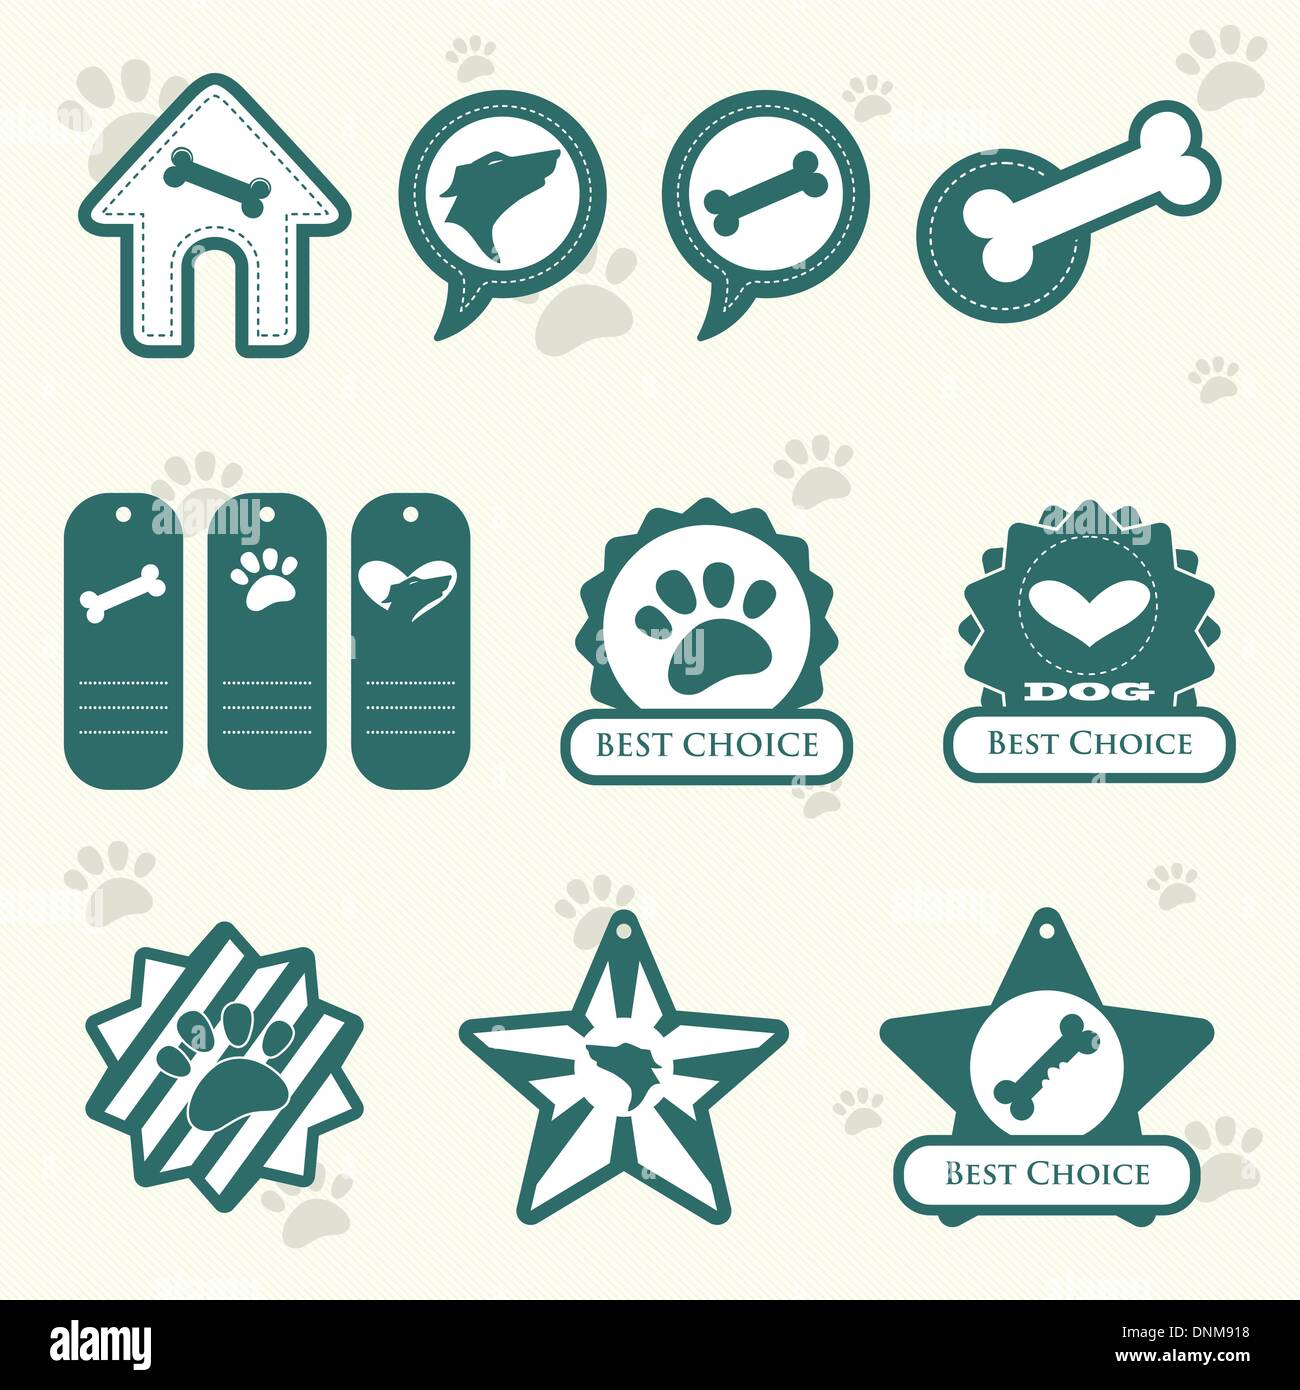 A vector illustration of dog label designs Stock Vector